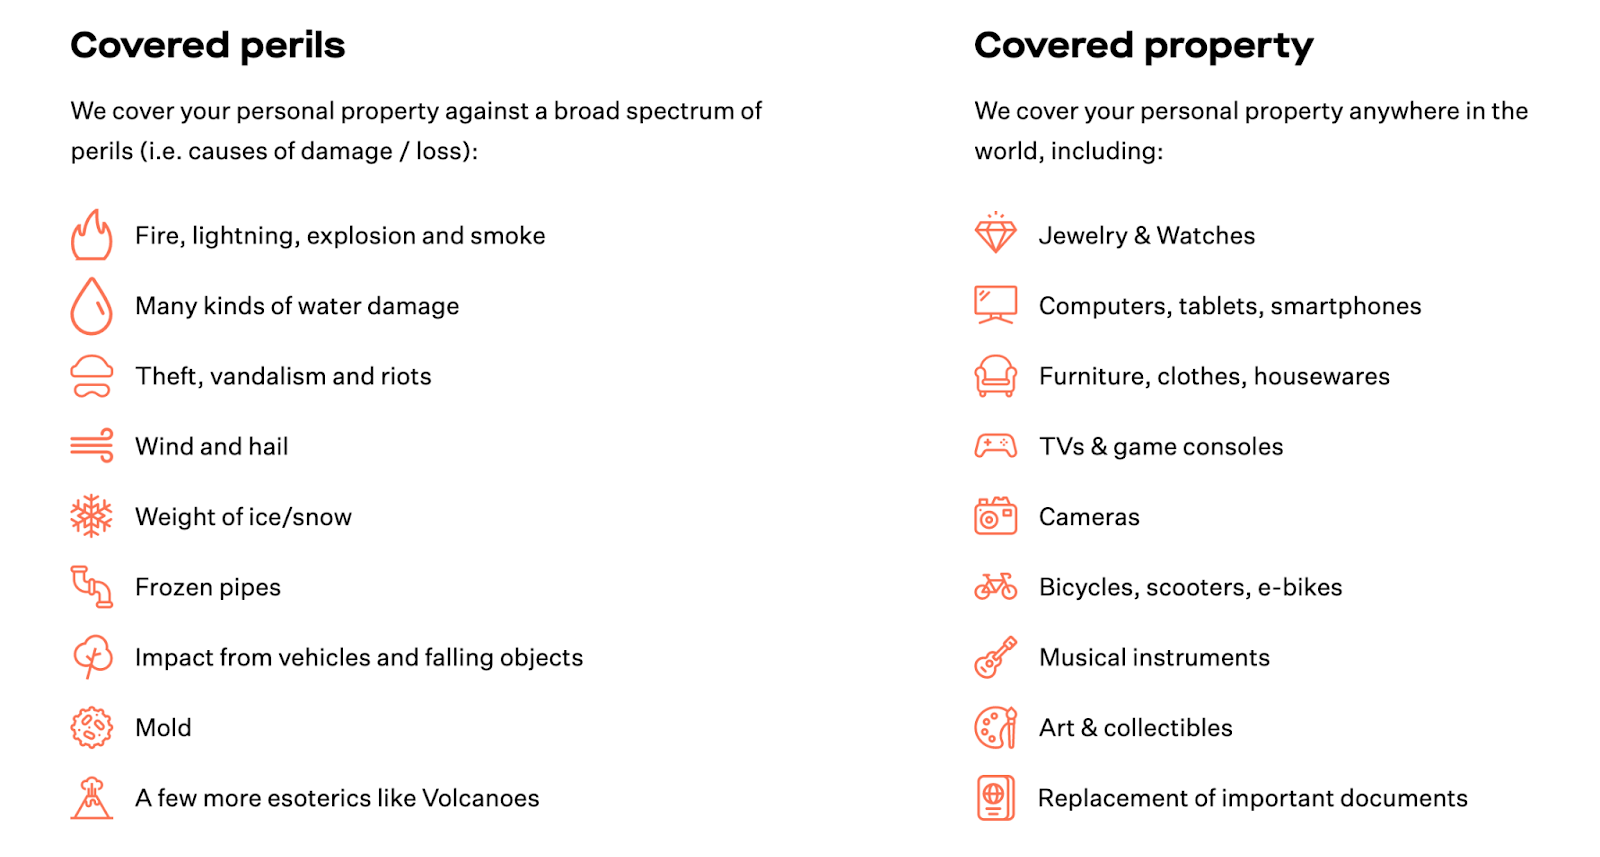 List of covered perils and covered property on Goodcover.com.